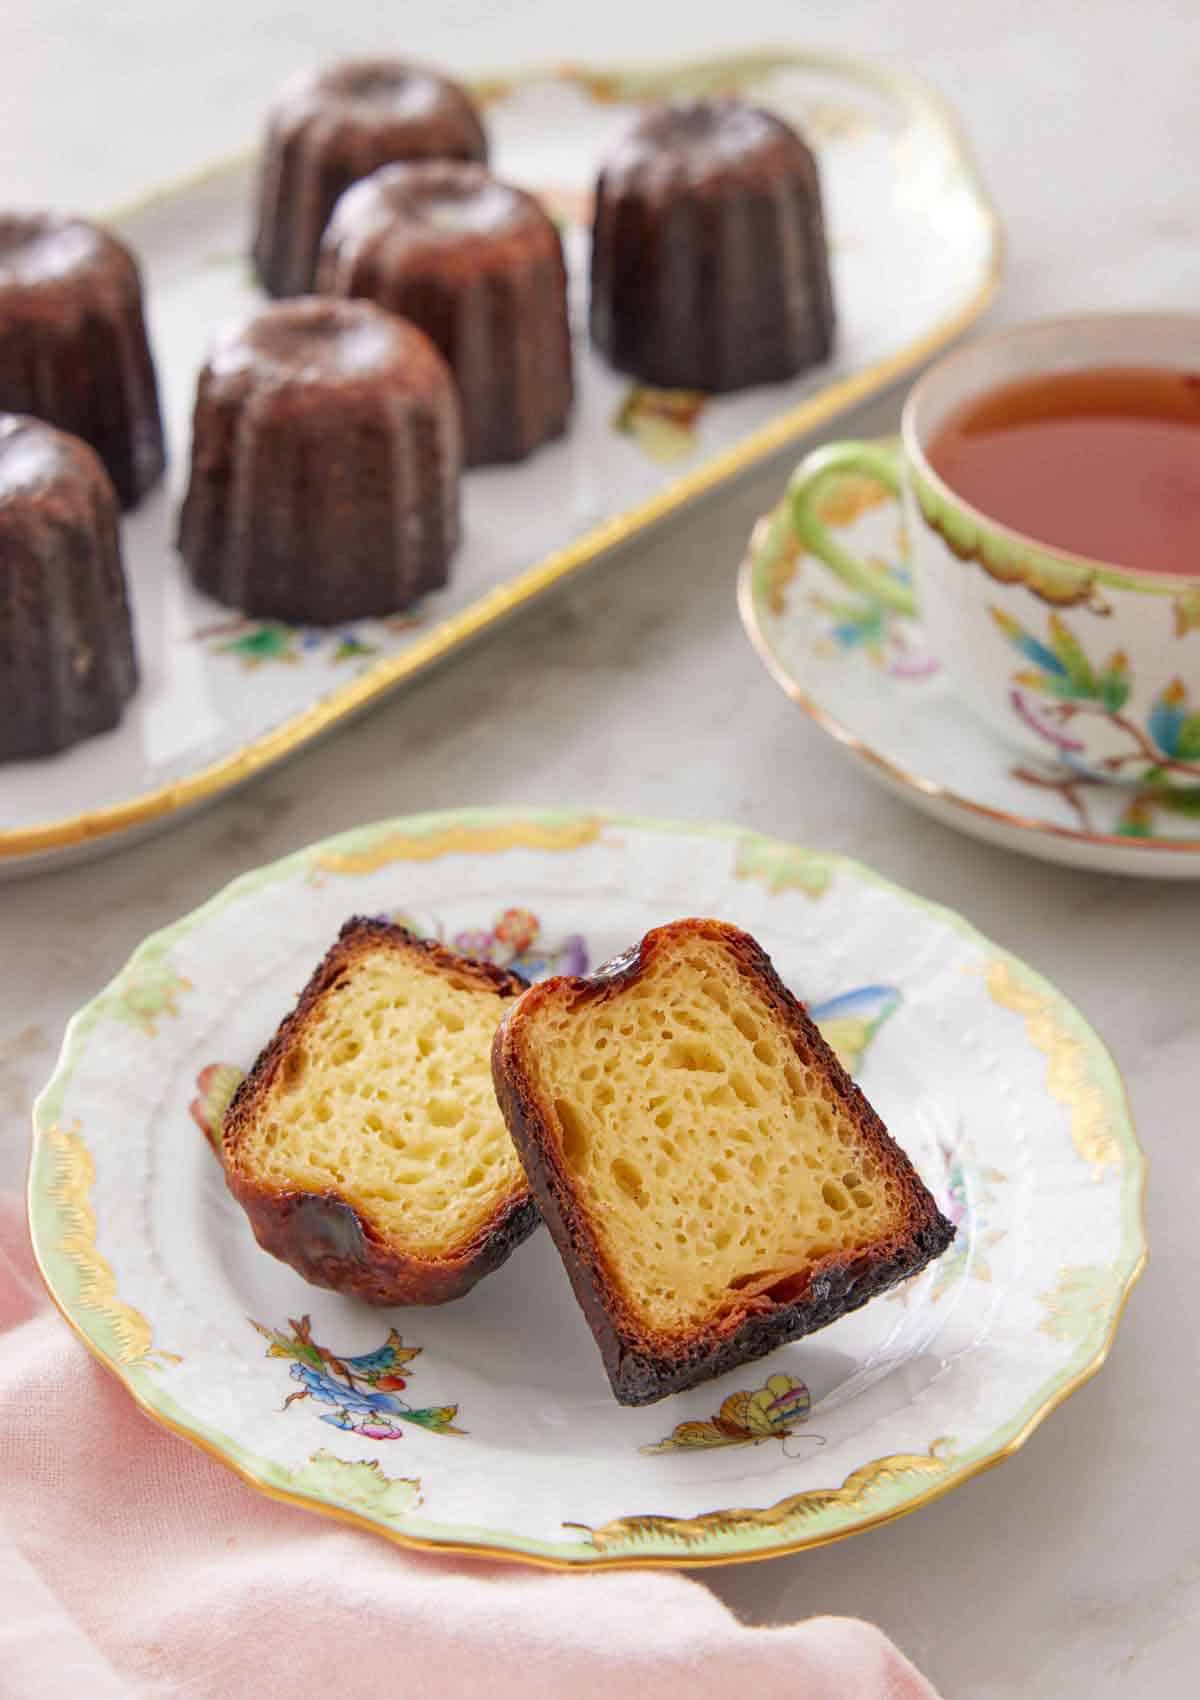 A plate with a canelé cut in half, showing the inside texture. Tea and a platte of canelés in the background.